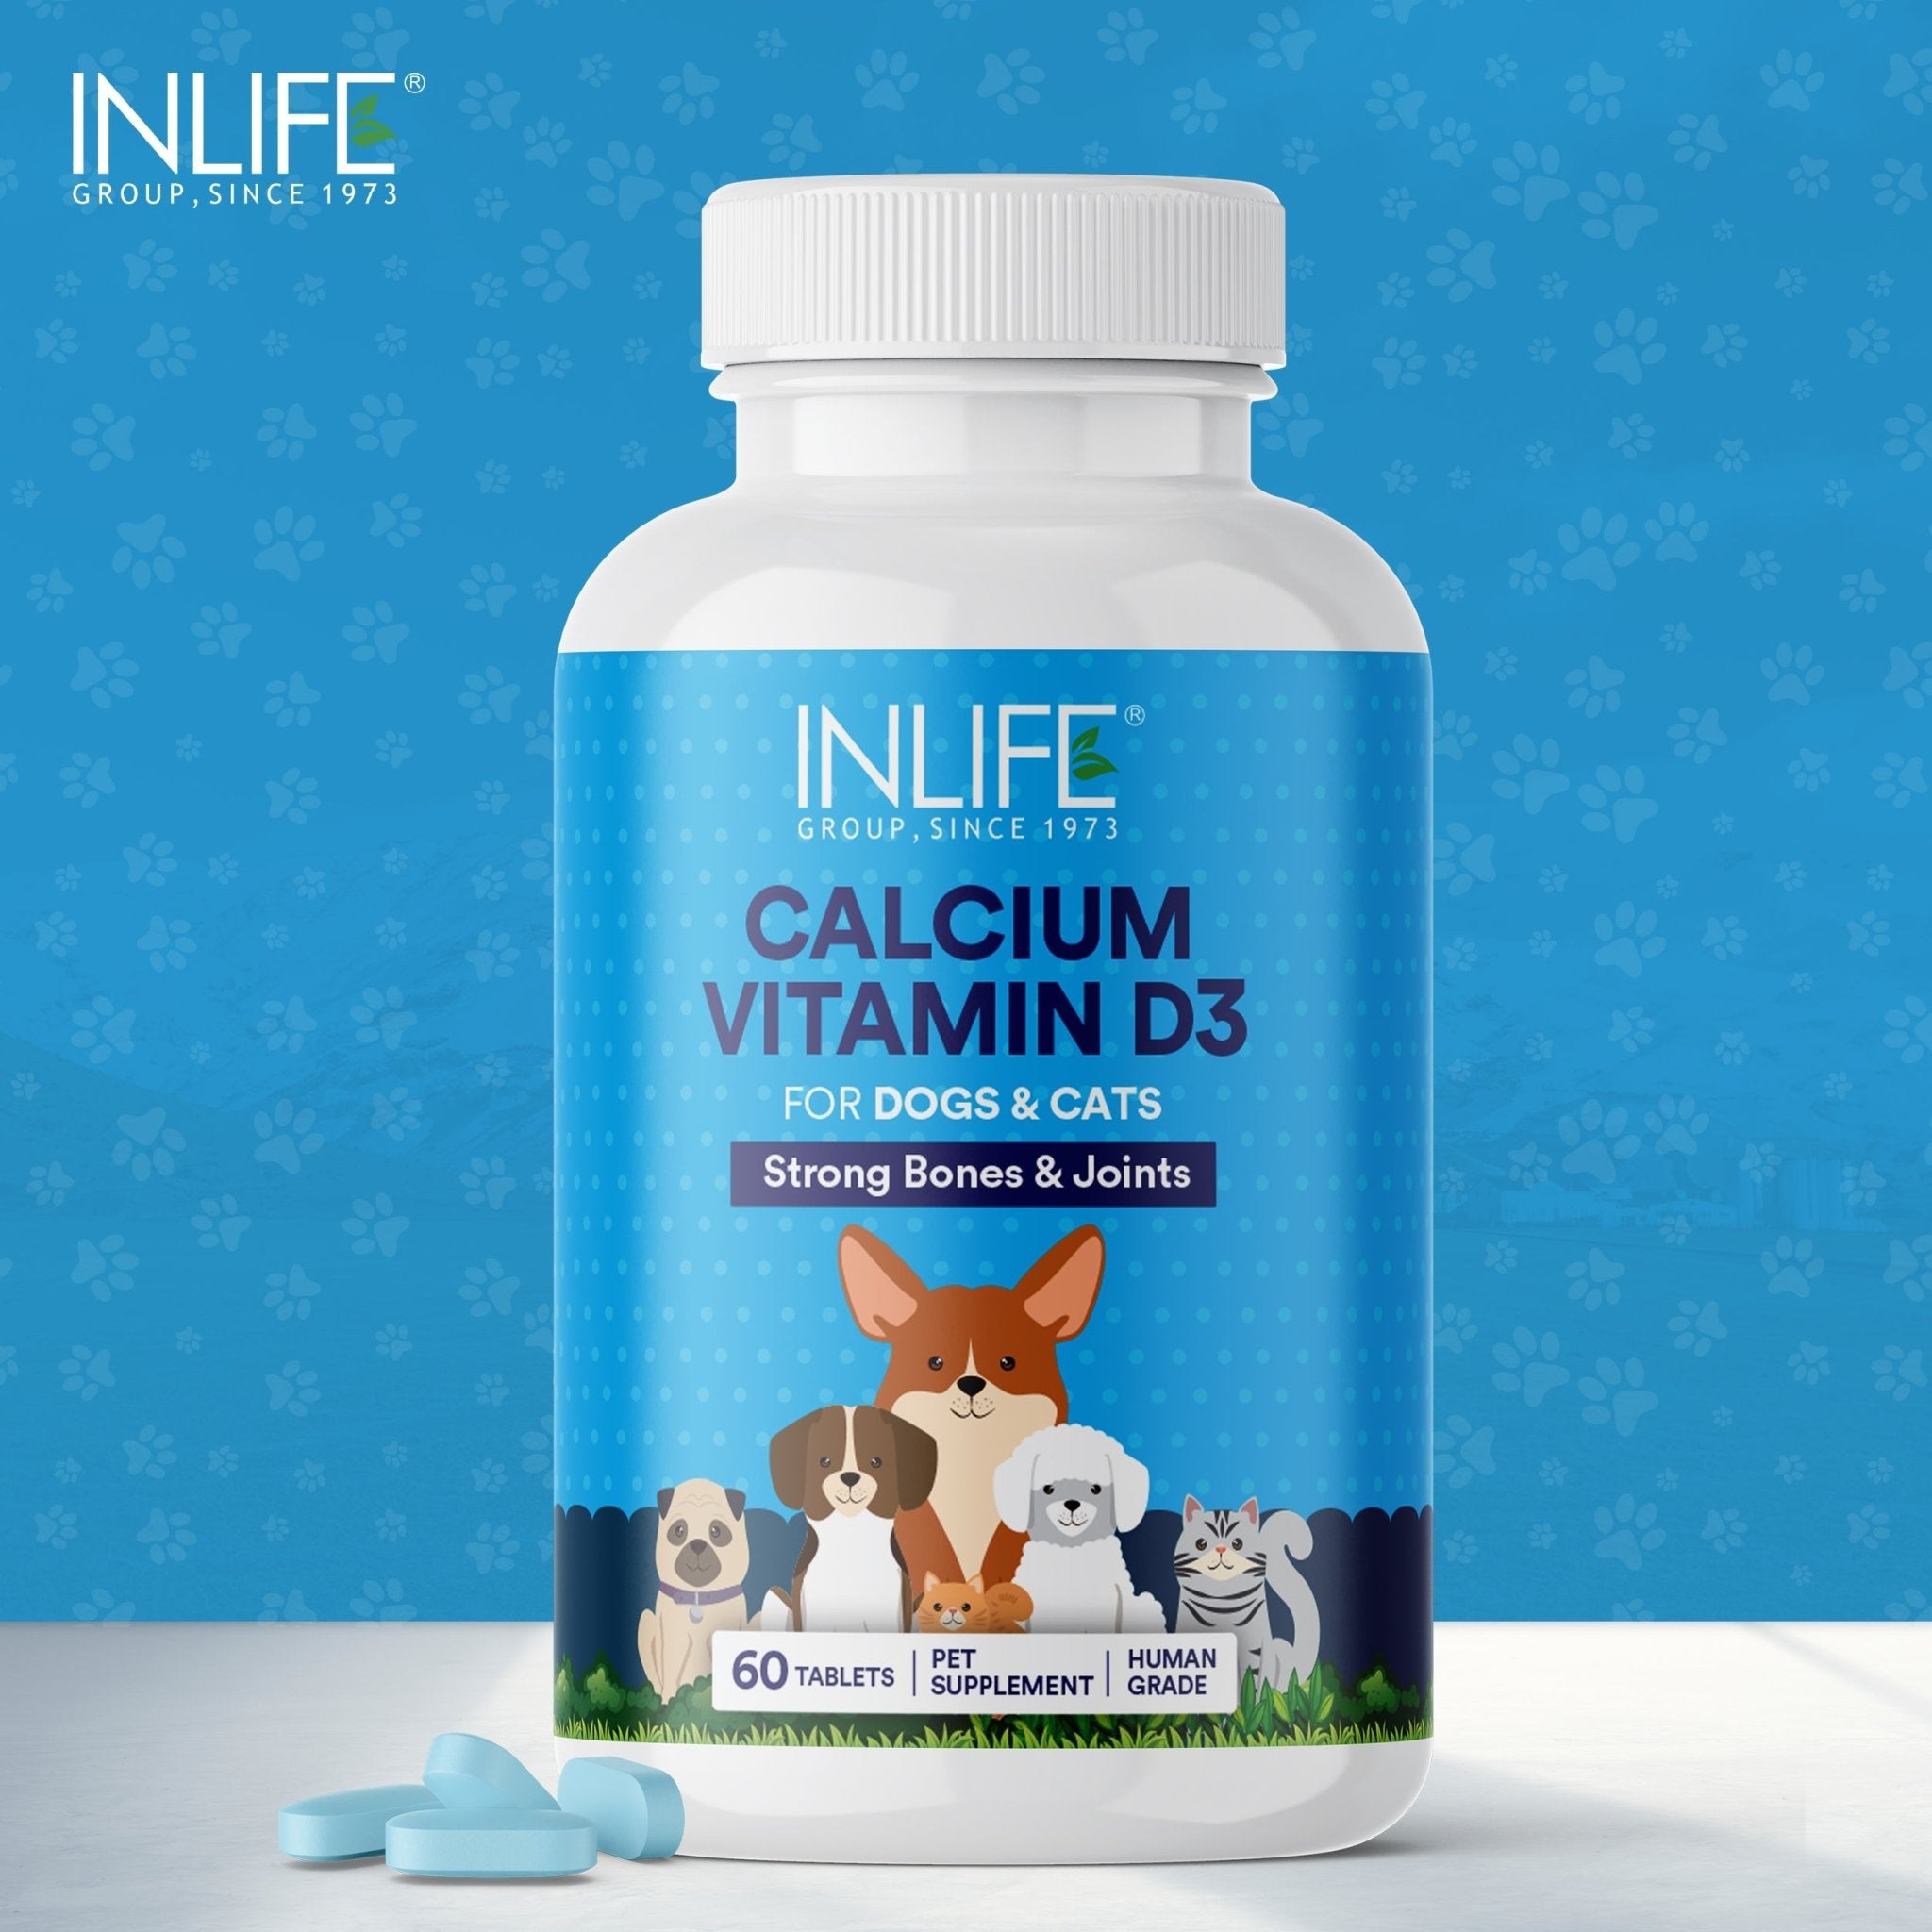 INLIFE Calcium Tablets for Dogs Cats with Vitamin D3 | Stronger Bones, Teeth & Joint Support In Pets- 60 Tablets - Inlife Pharma Private Limited